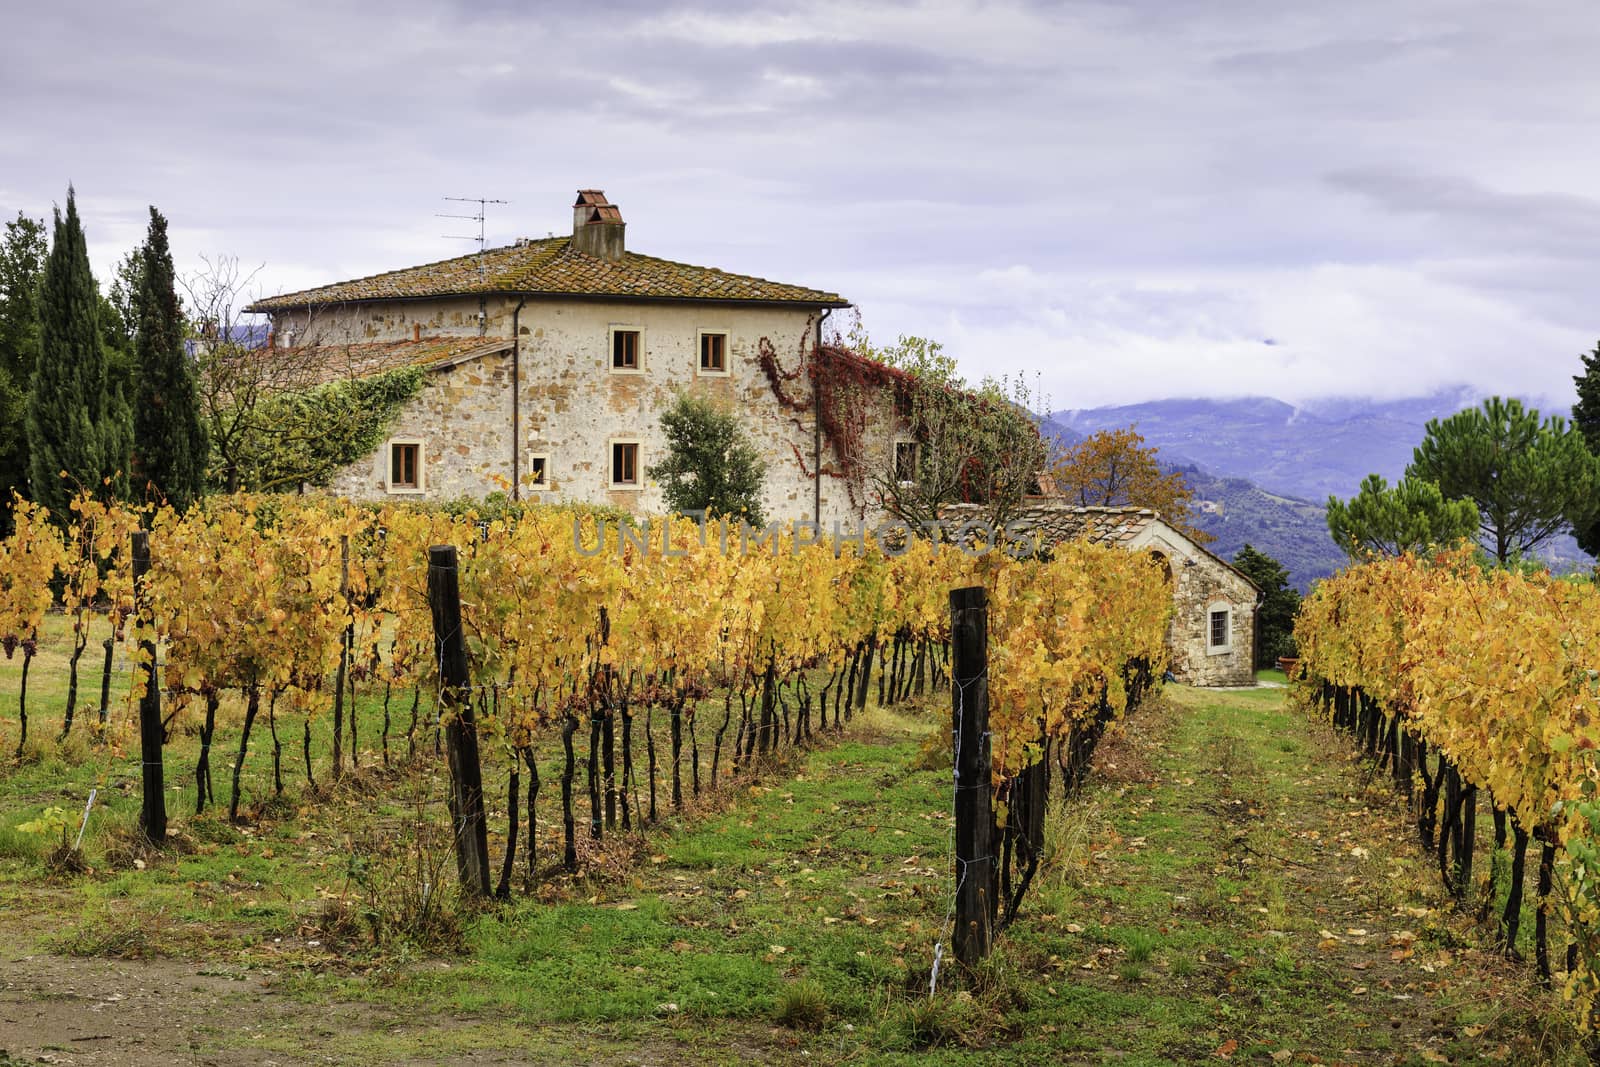 A fabolous rural house in Florence surrounded by a vineyard with orange leaves